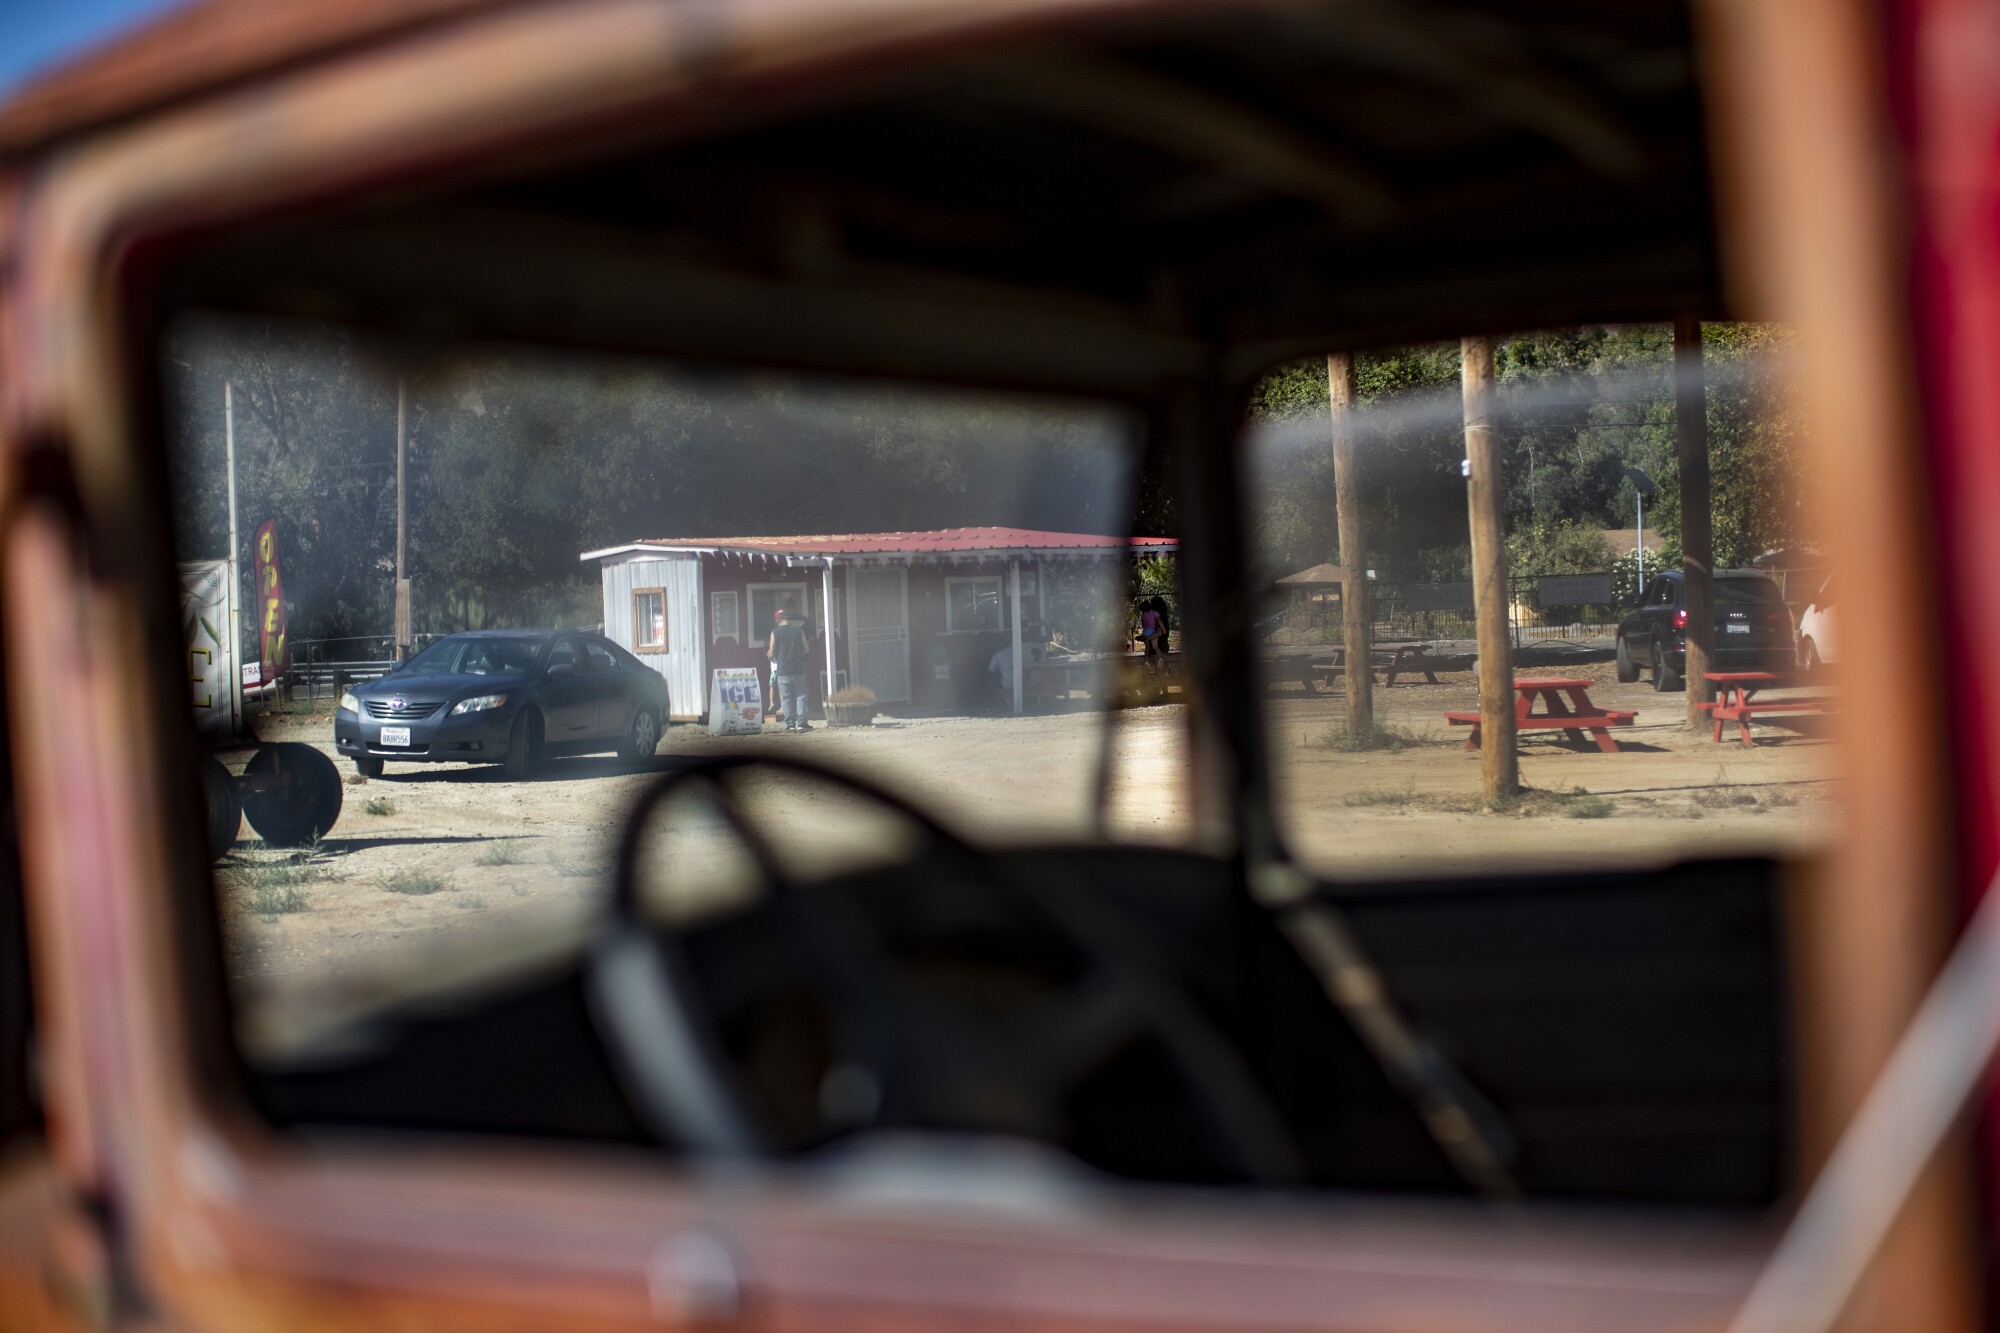 A view through the windows of a rusted truck of customers outside a rural food stand